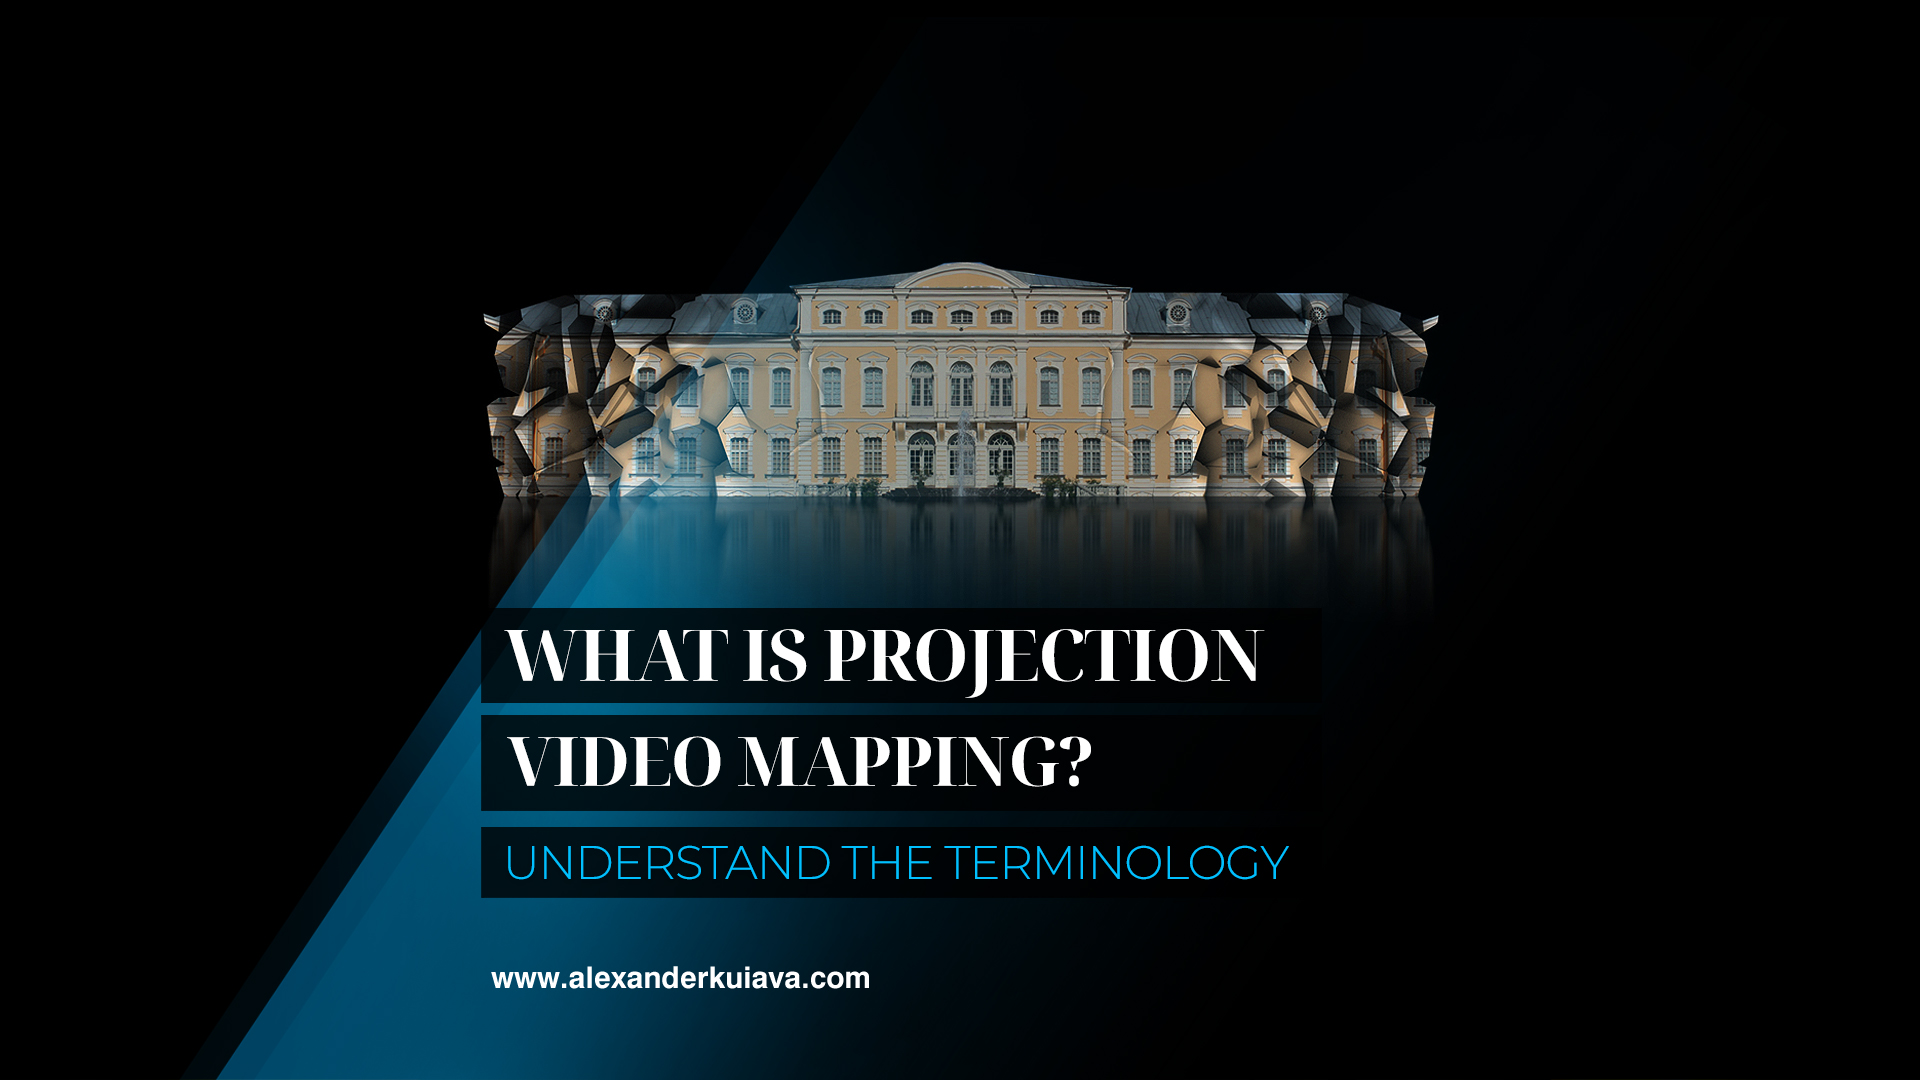 What is Projection Mapping?